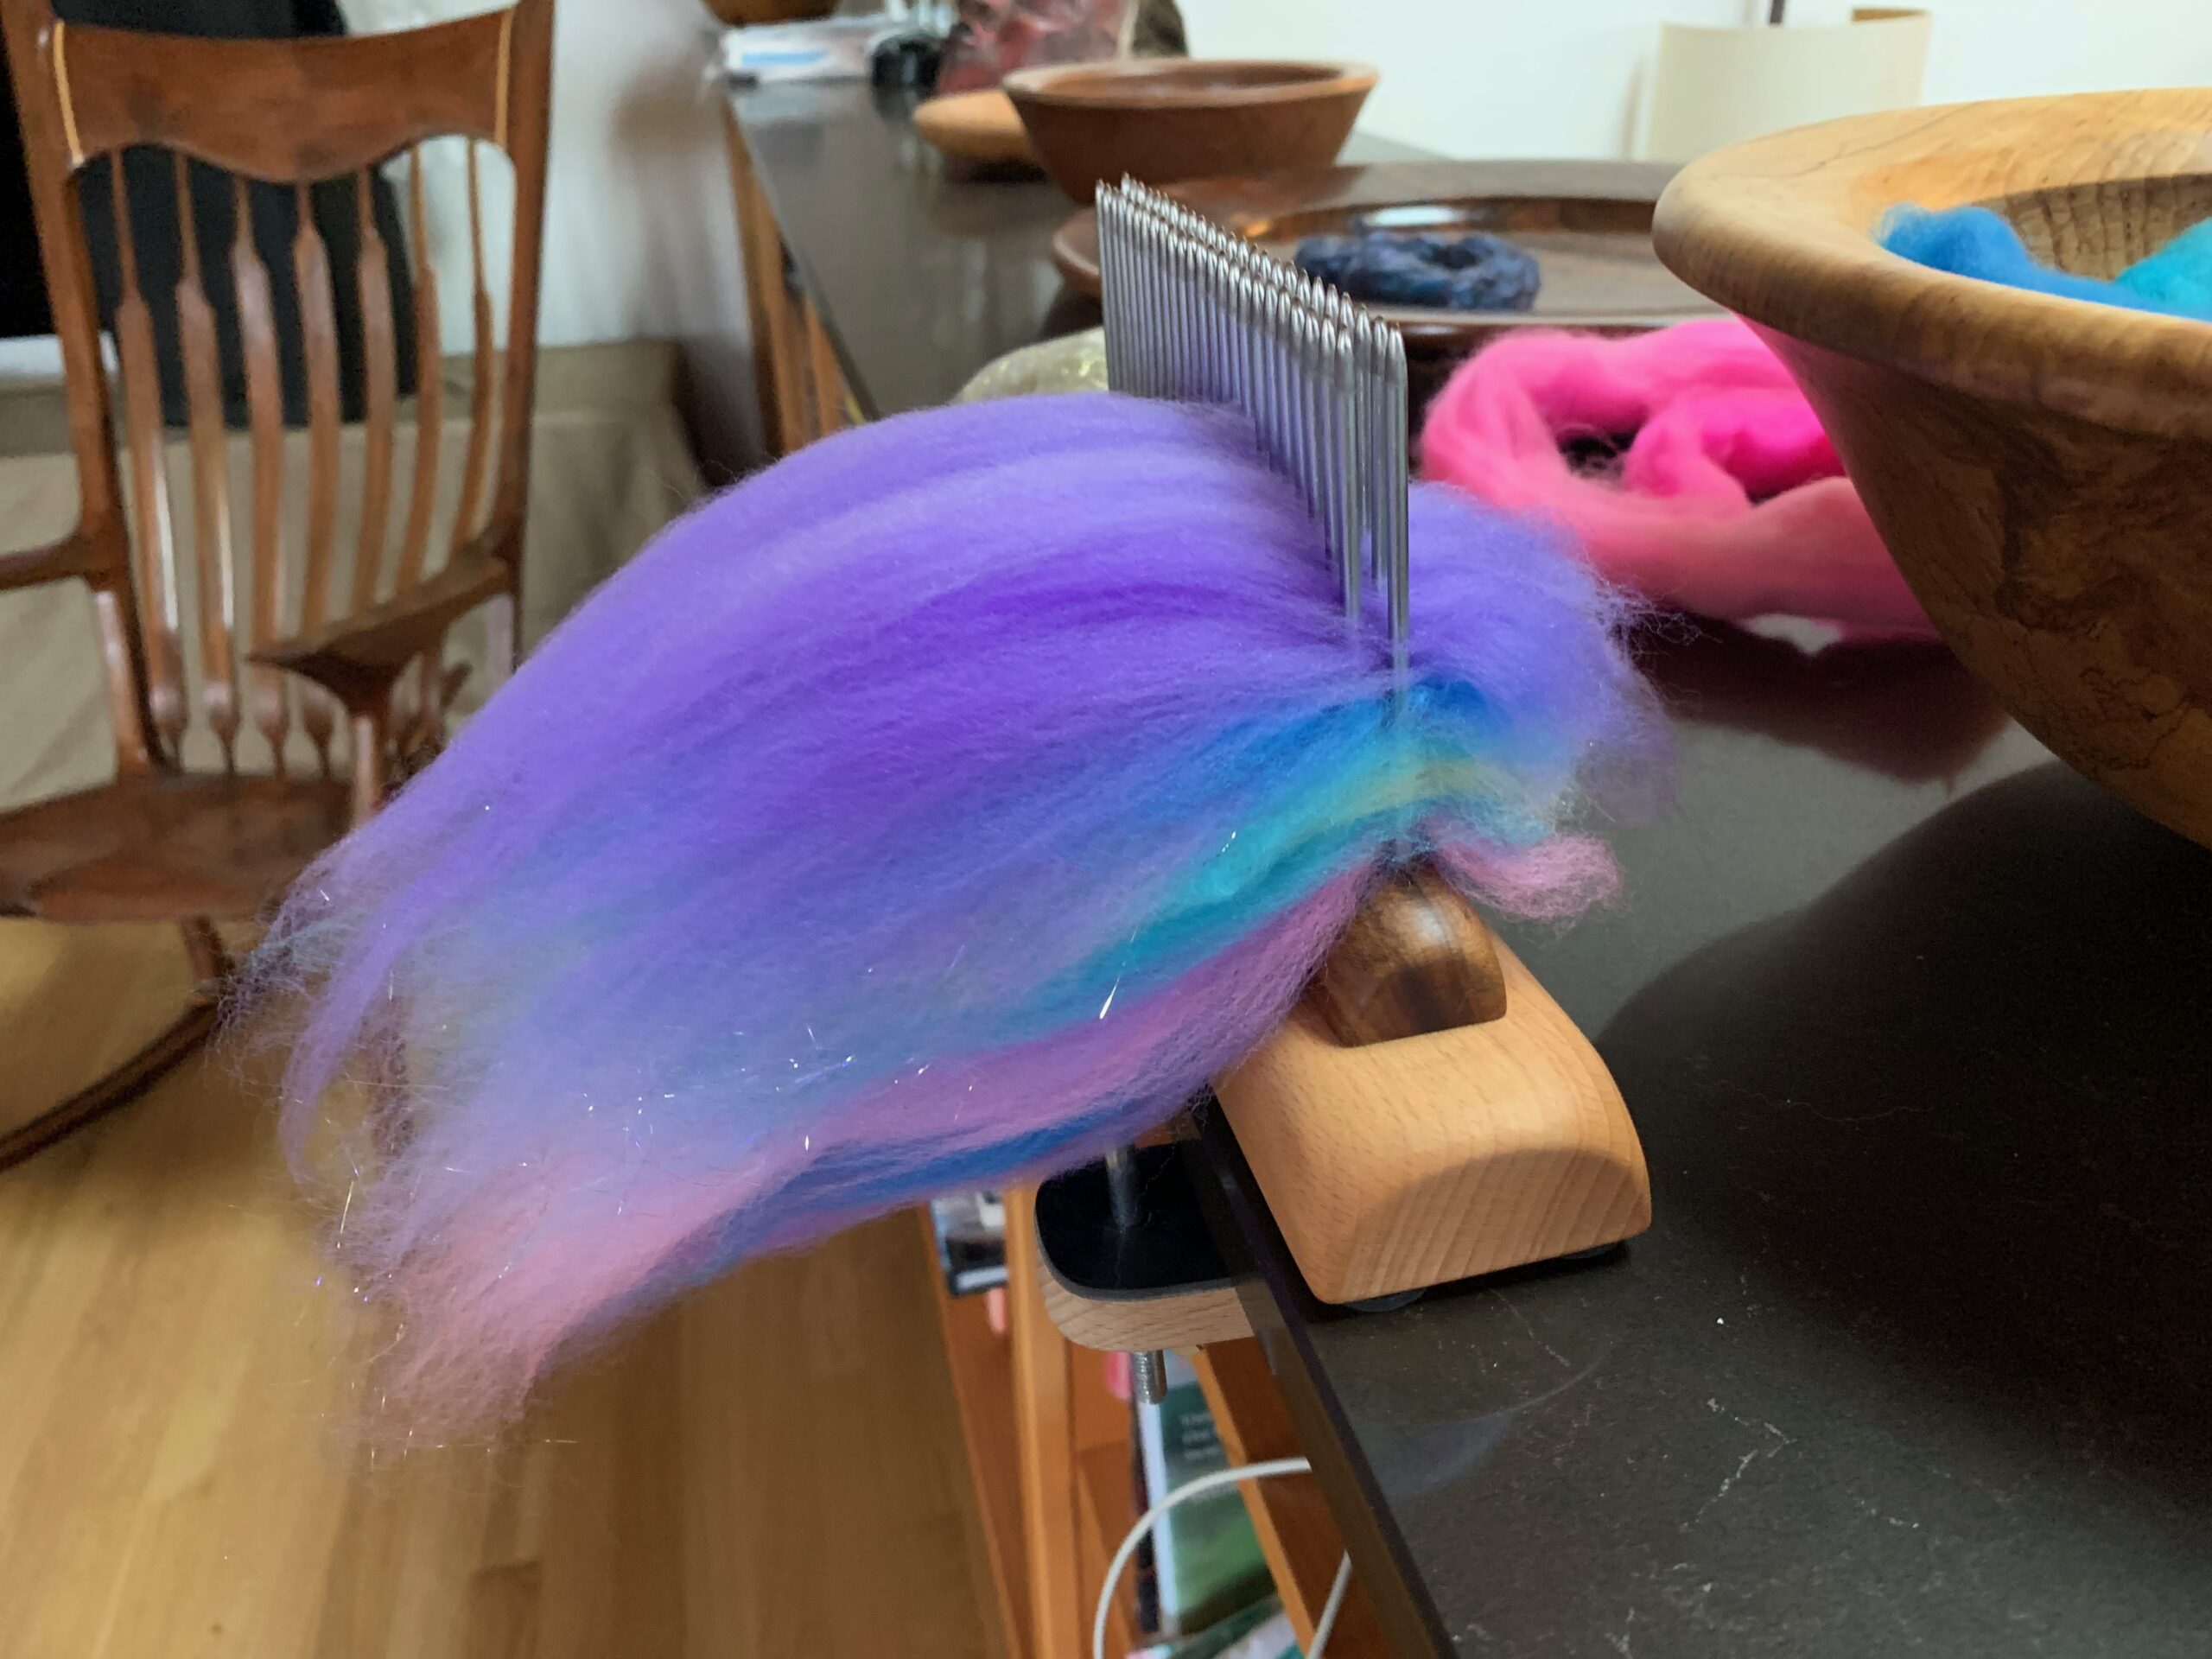 A blending comb clamped onto a counter, with layers of baby pink, blue, yellow, and purple fiber on it, along with some angelina stellina sparkles. In the background you can see more fiber, several wooden bowls my partner made, and a gorgeous wooden rocking chair. The fiber is from Frabjous Fibers, one of their Three Feet of Fiber bags.